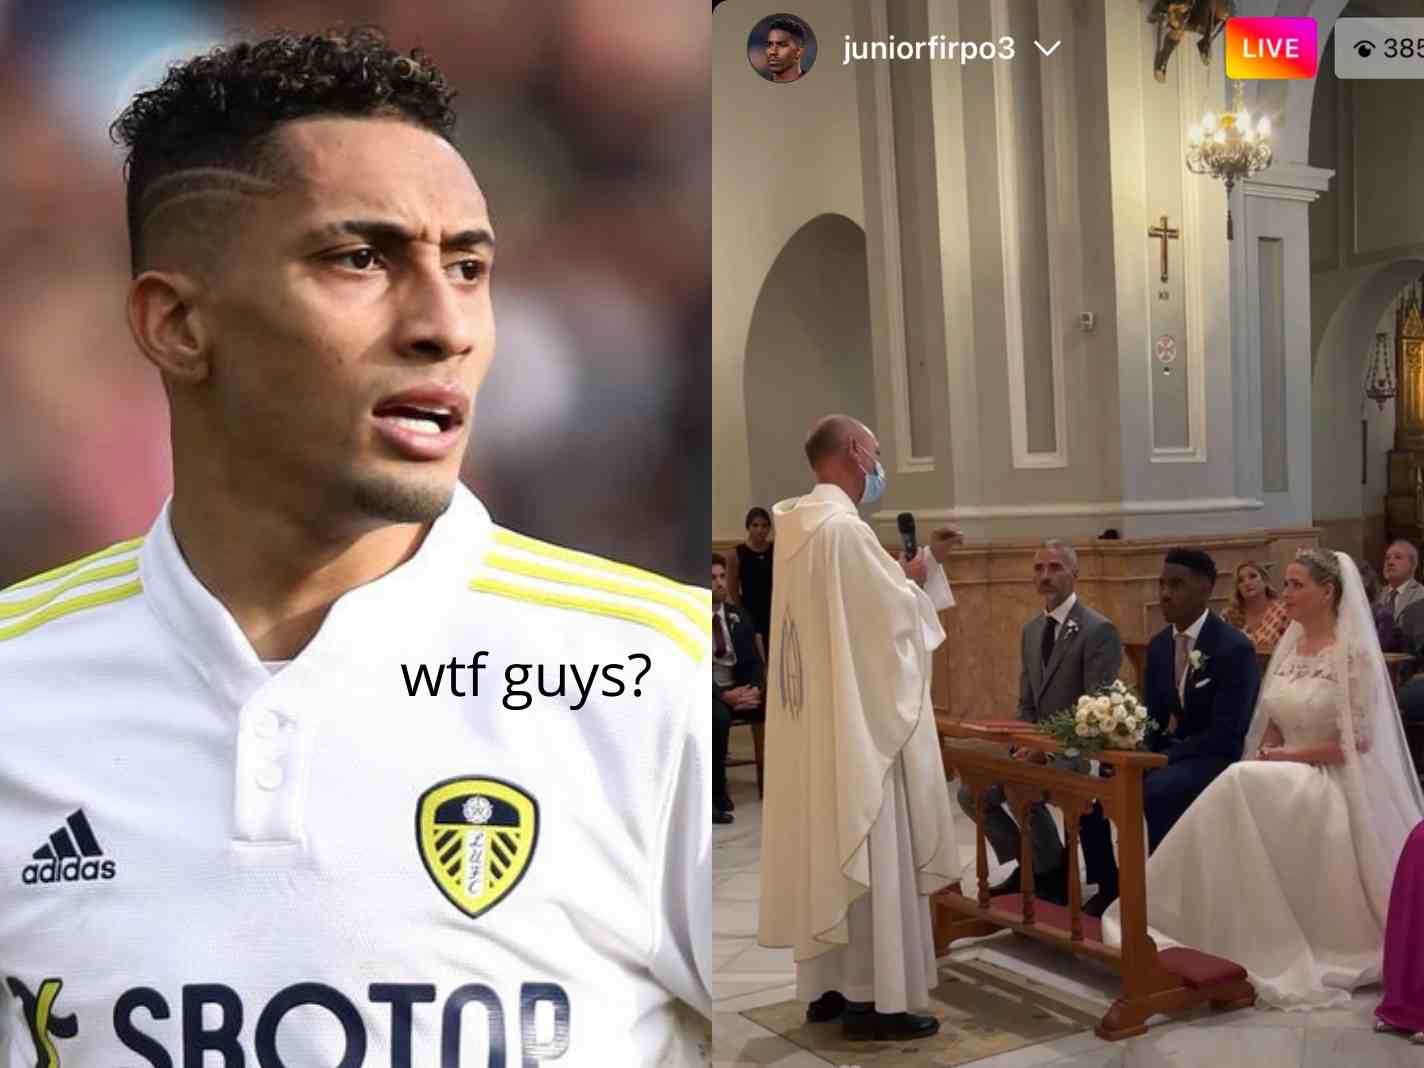 Leeds United fans hijack Junior Firpo’s wedding to beg Raphinha to stay